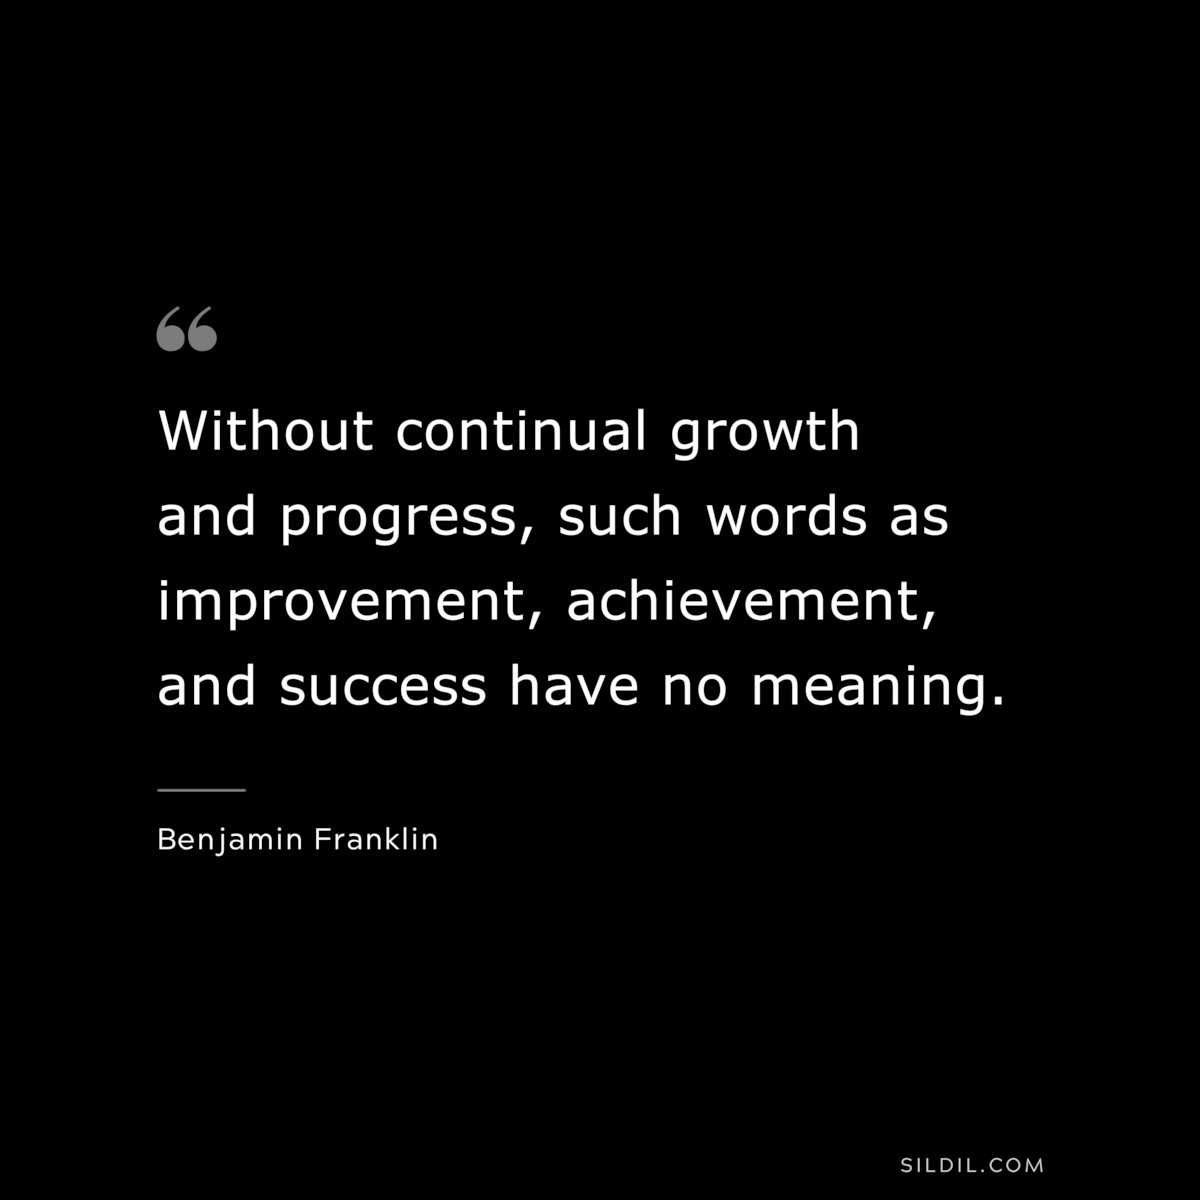 Without continual growth and progress, such words as improvement, achievement, and success have no meaning. ― Benjamin Franklin